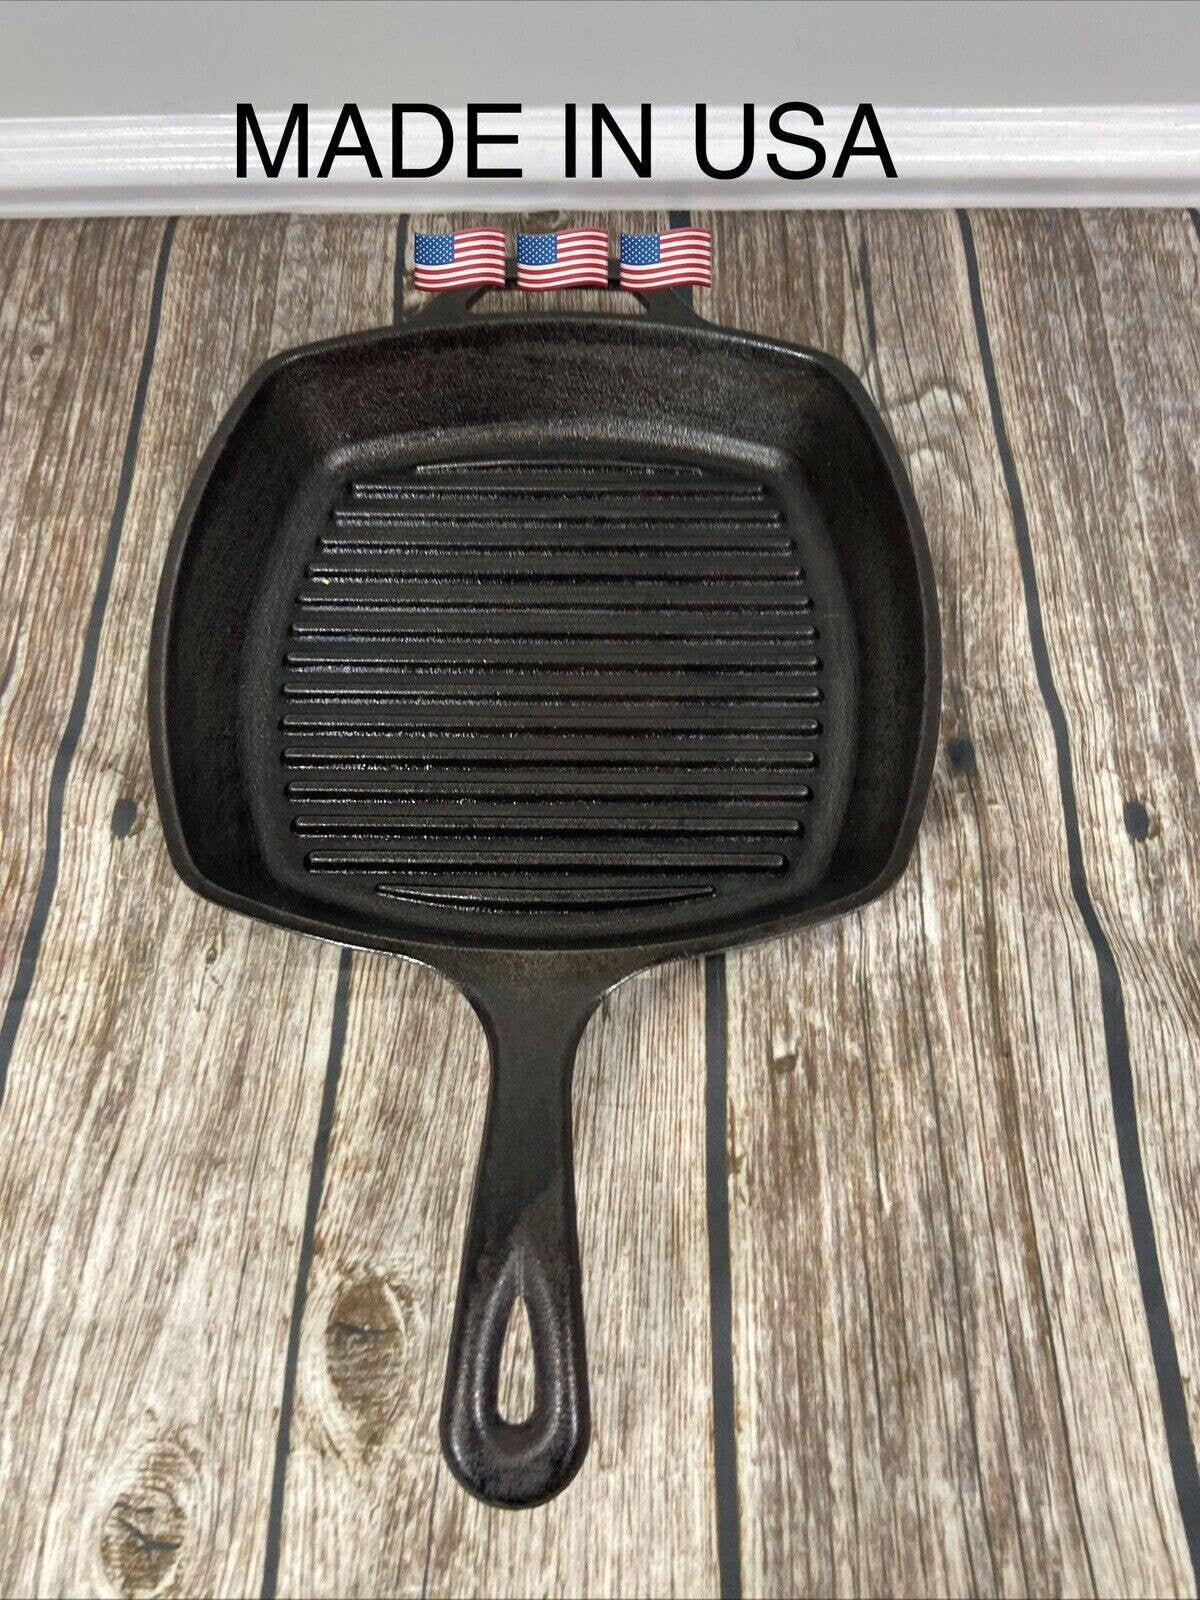 Cast by Calphalon Griddle Large Square Cast Iron Grill Pan Skillet 10x10  Grill